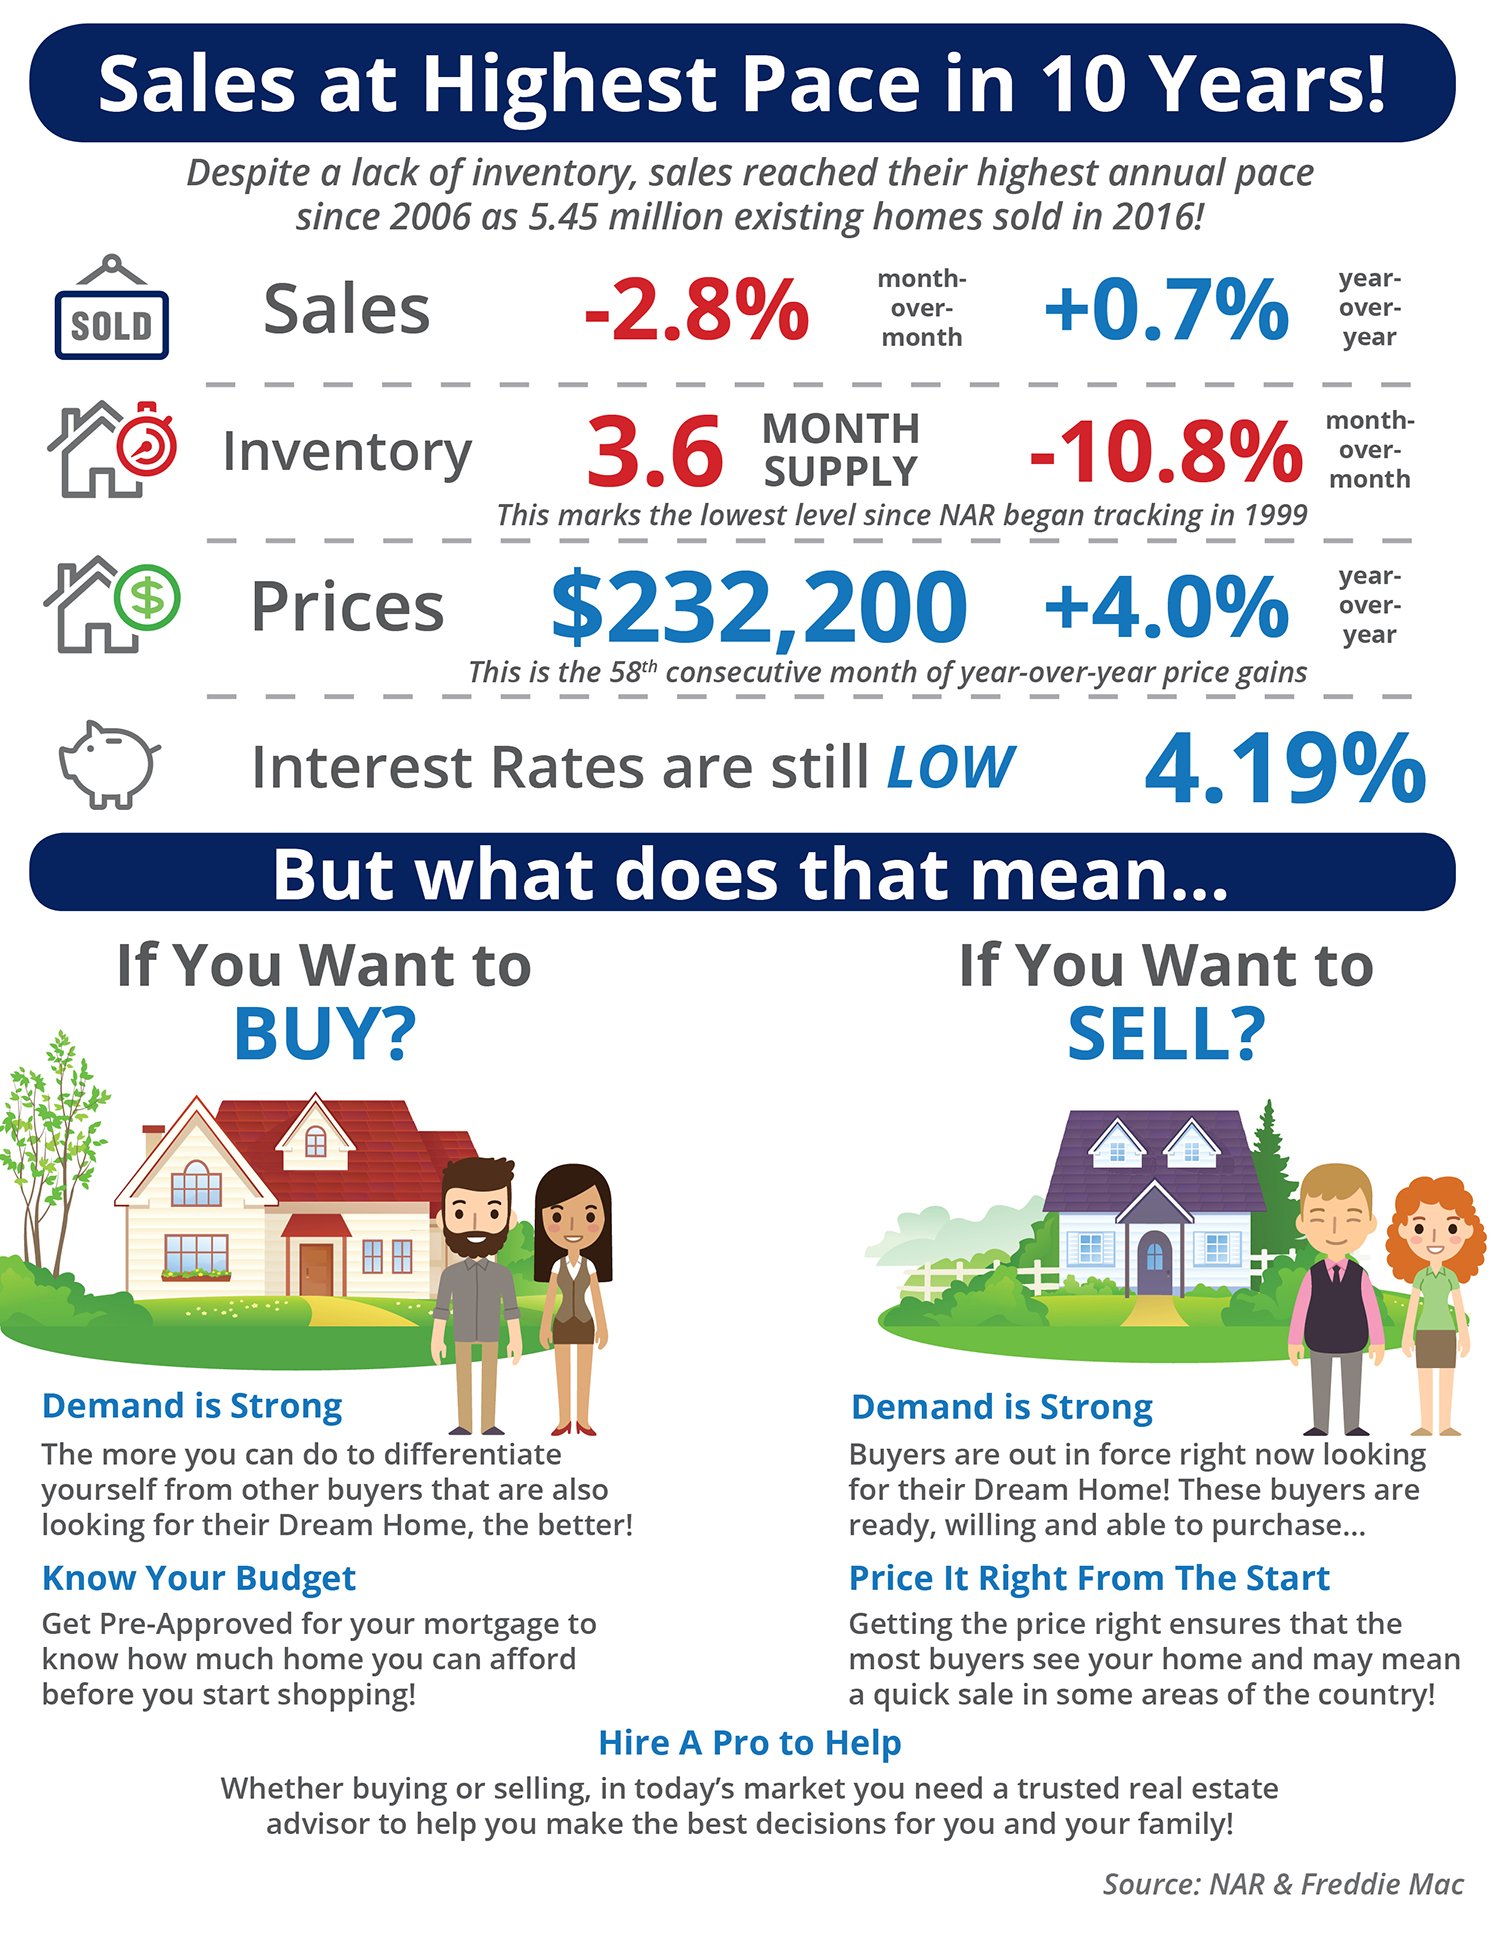 Sales at Highest Pace in 10 Years! [INFOGRAPHIC] | Simplifying The Market